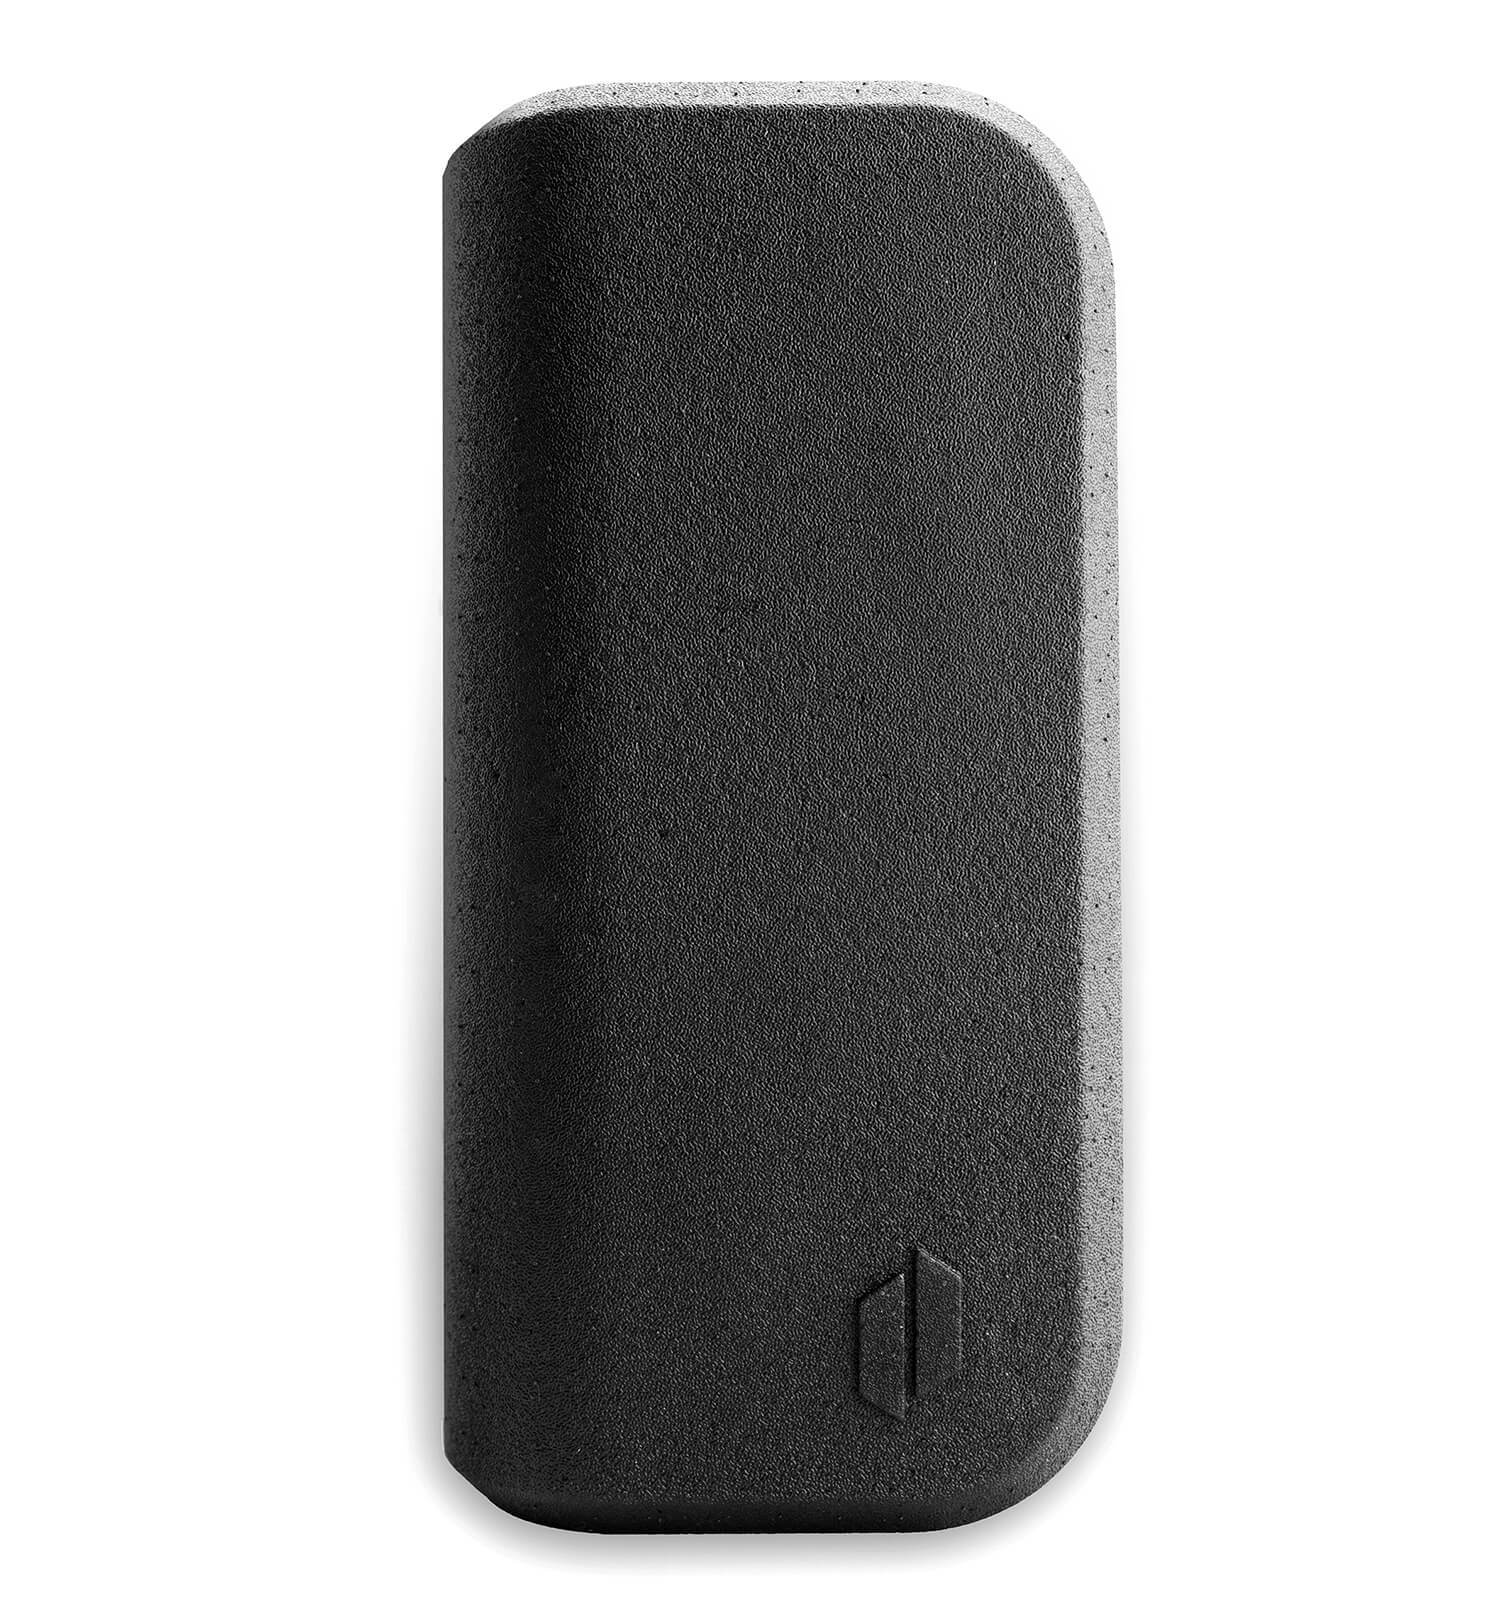  Front side of Puffco black vaporizer for cannabis carrying case with logo